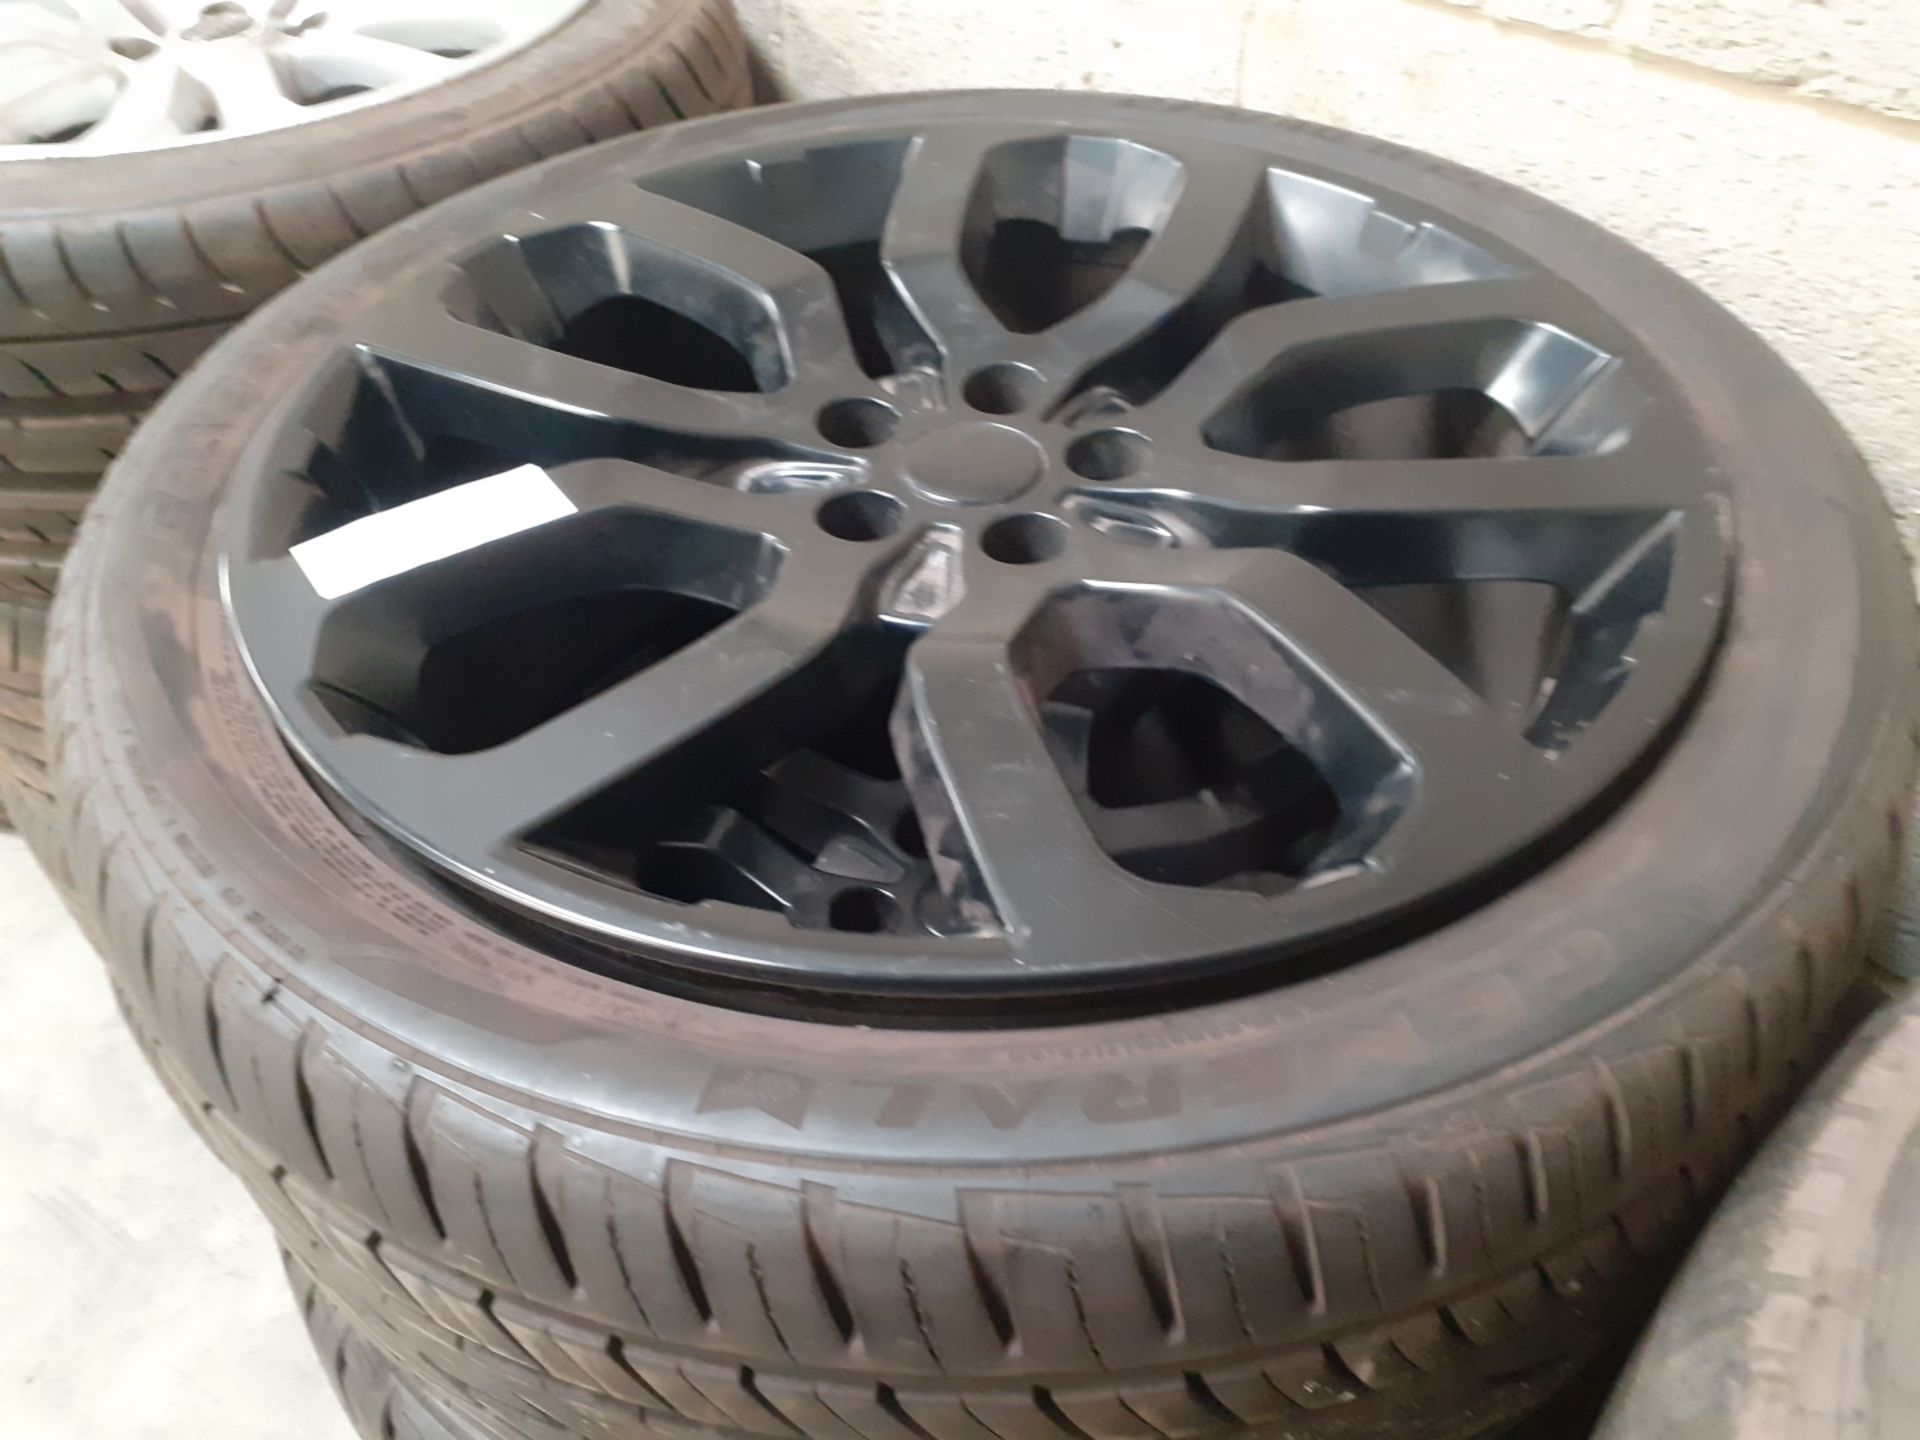 JOB LOT OF 30 SETS OF ALLOY WHEELS WITH TYRES, LAND ROVER RANGE ROVER, OVER £31K RRP *NO VAT* - Image 12 of 17